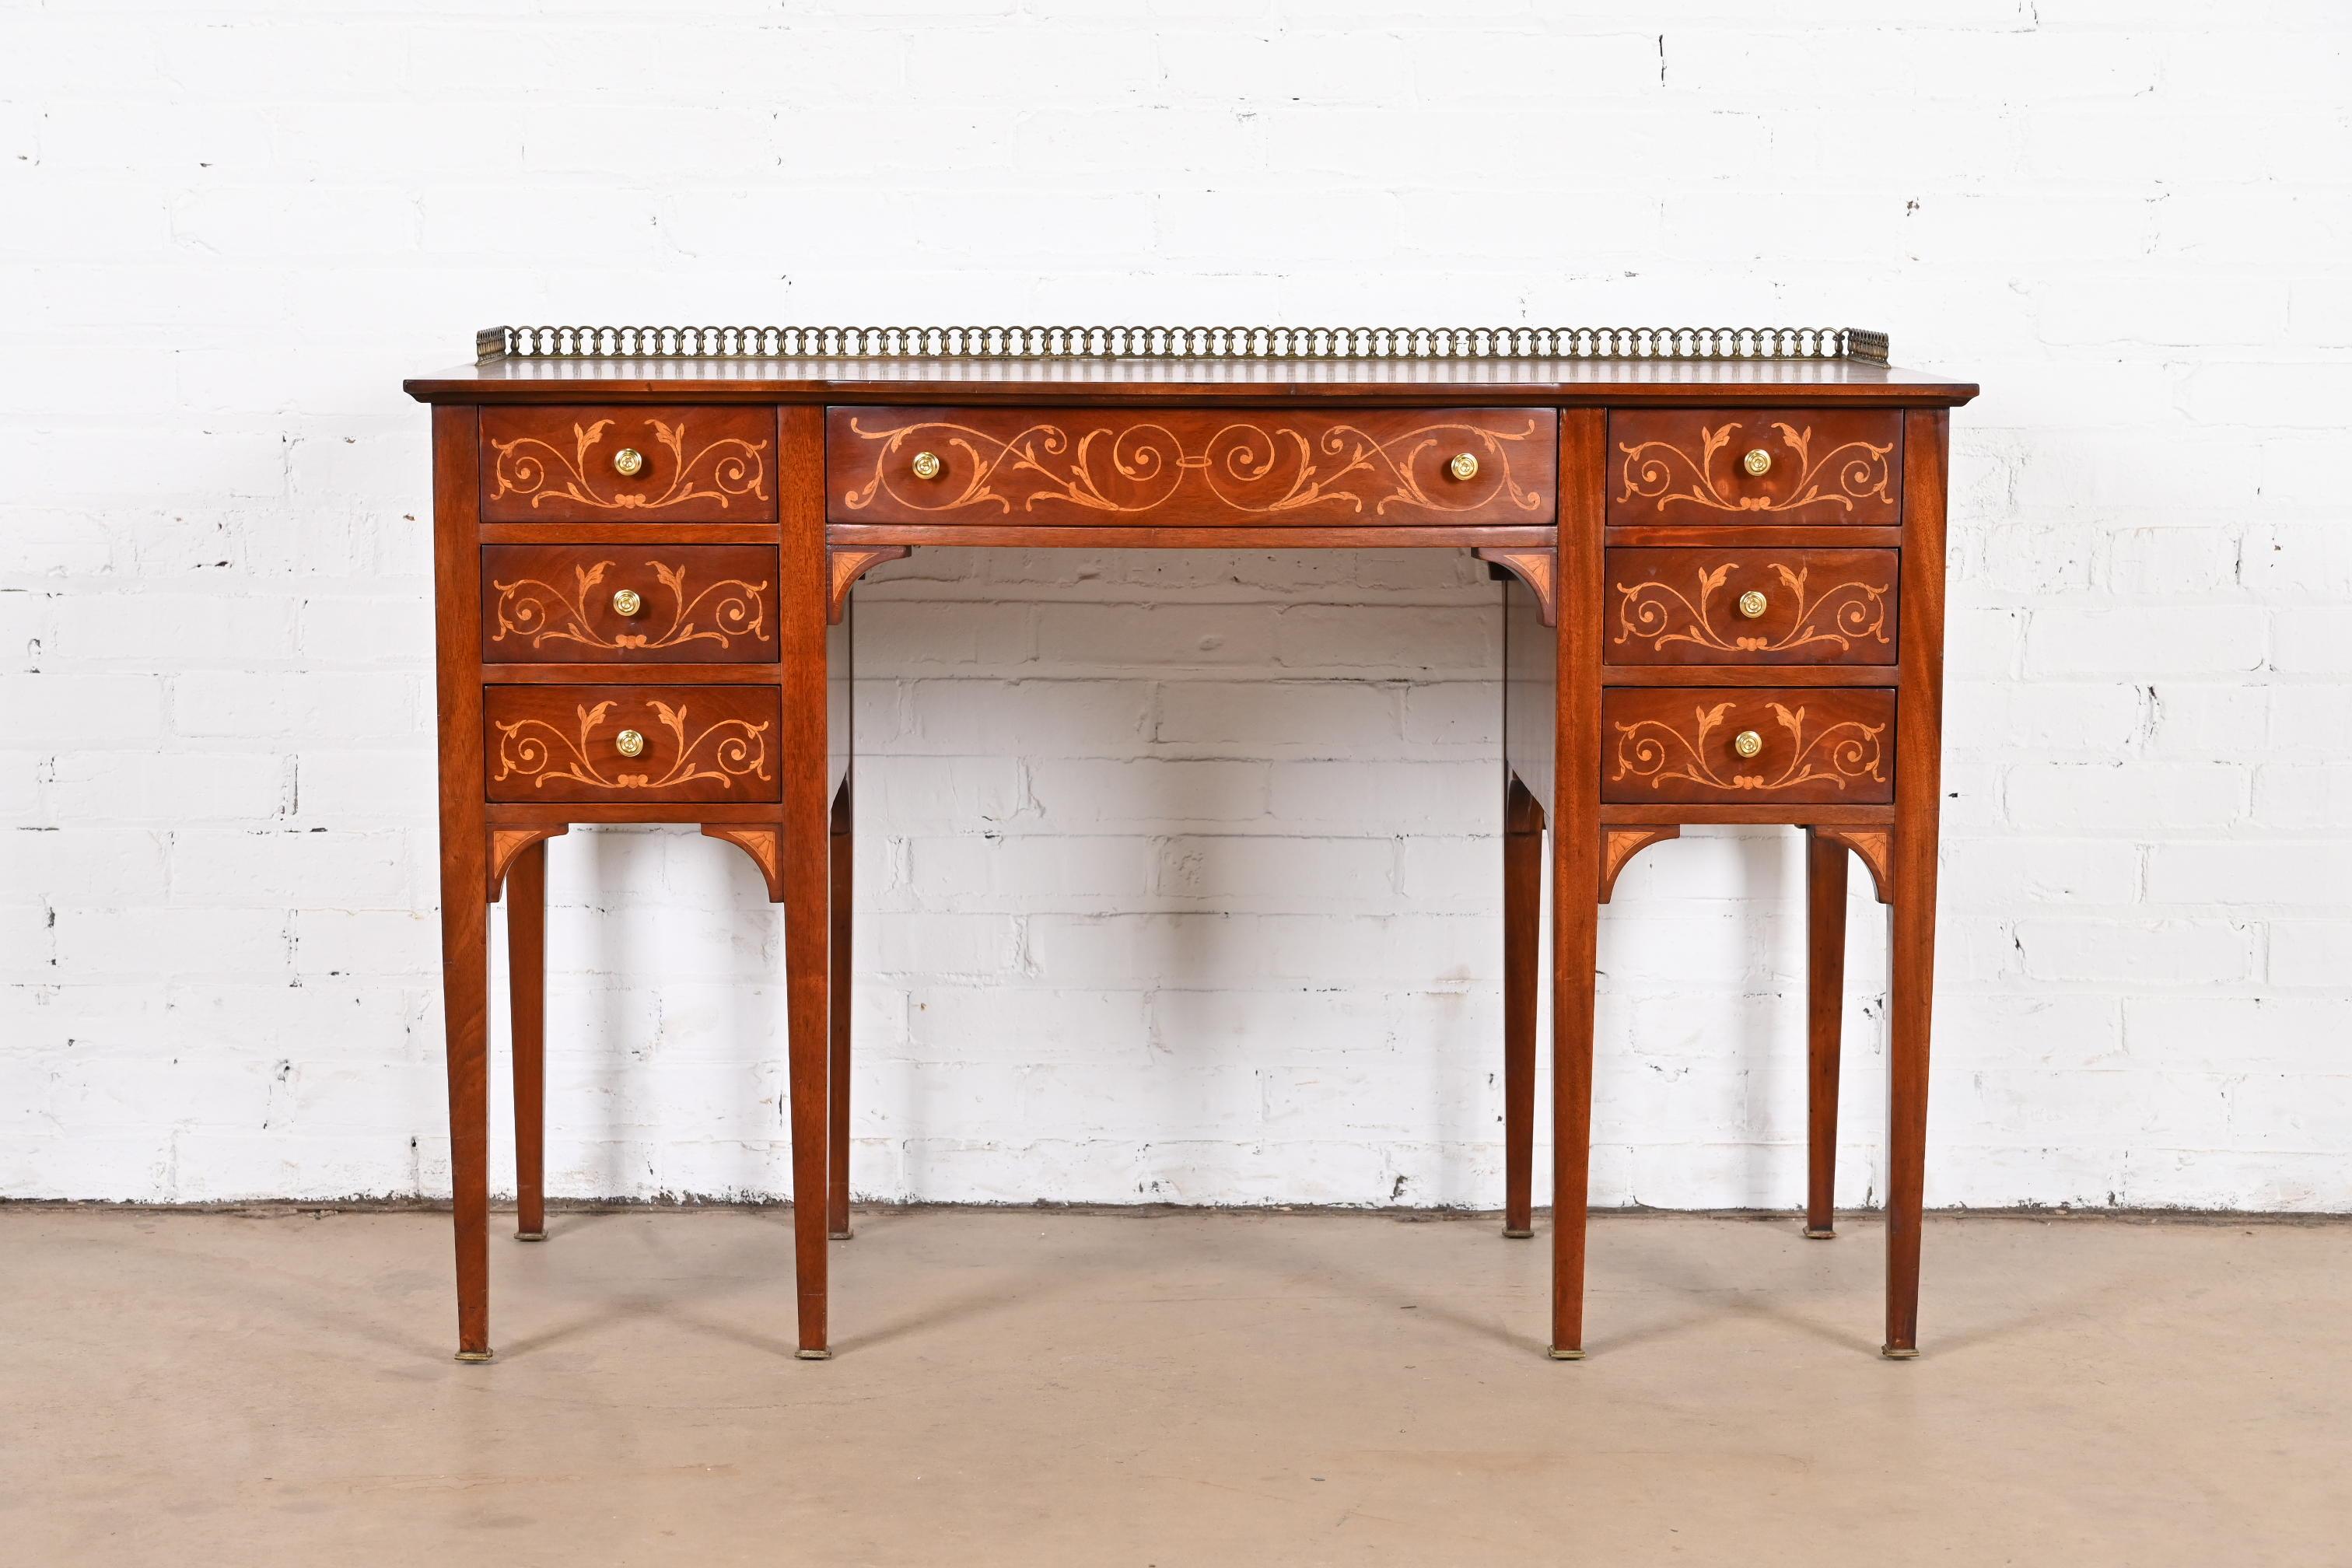 A gorgeous vintage French Regency Louis XVI style vanity or desk
By Johnson Furniture Co.
USA, circa 1930s
Mahogany, with beautiful satinwood inlaid floral marquetry, and original brass hardware and gallery.
Measures: 46